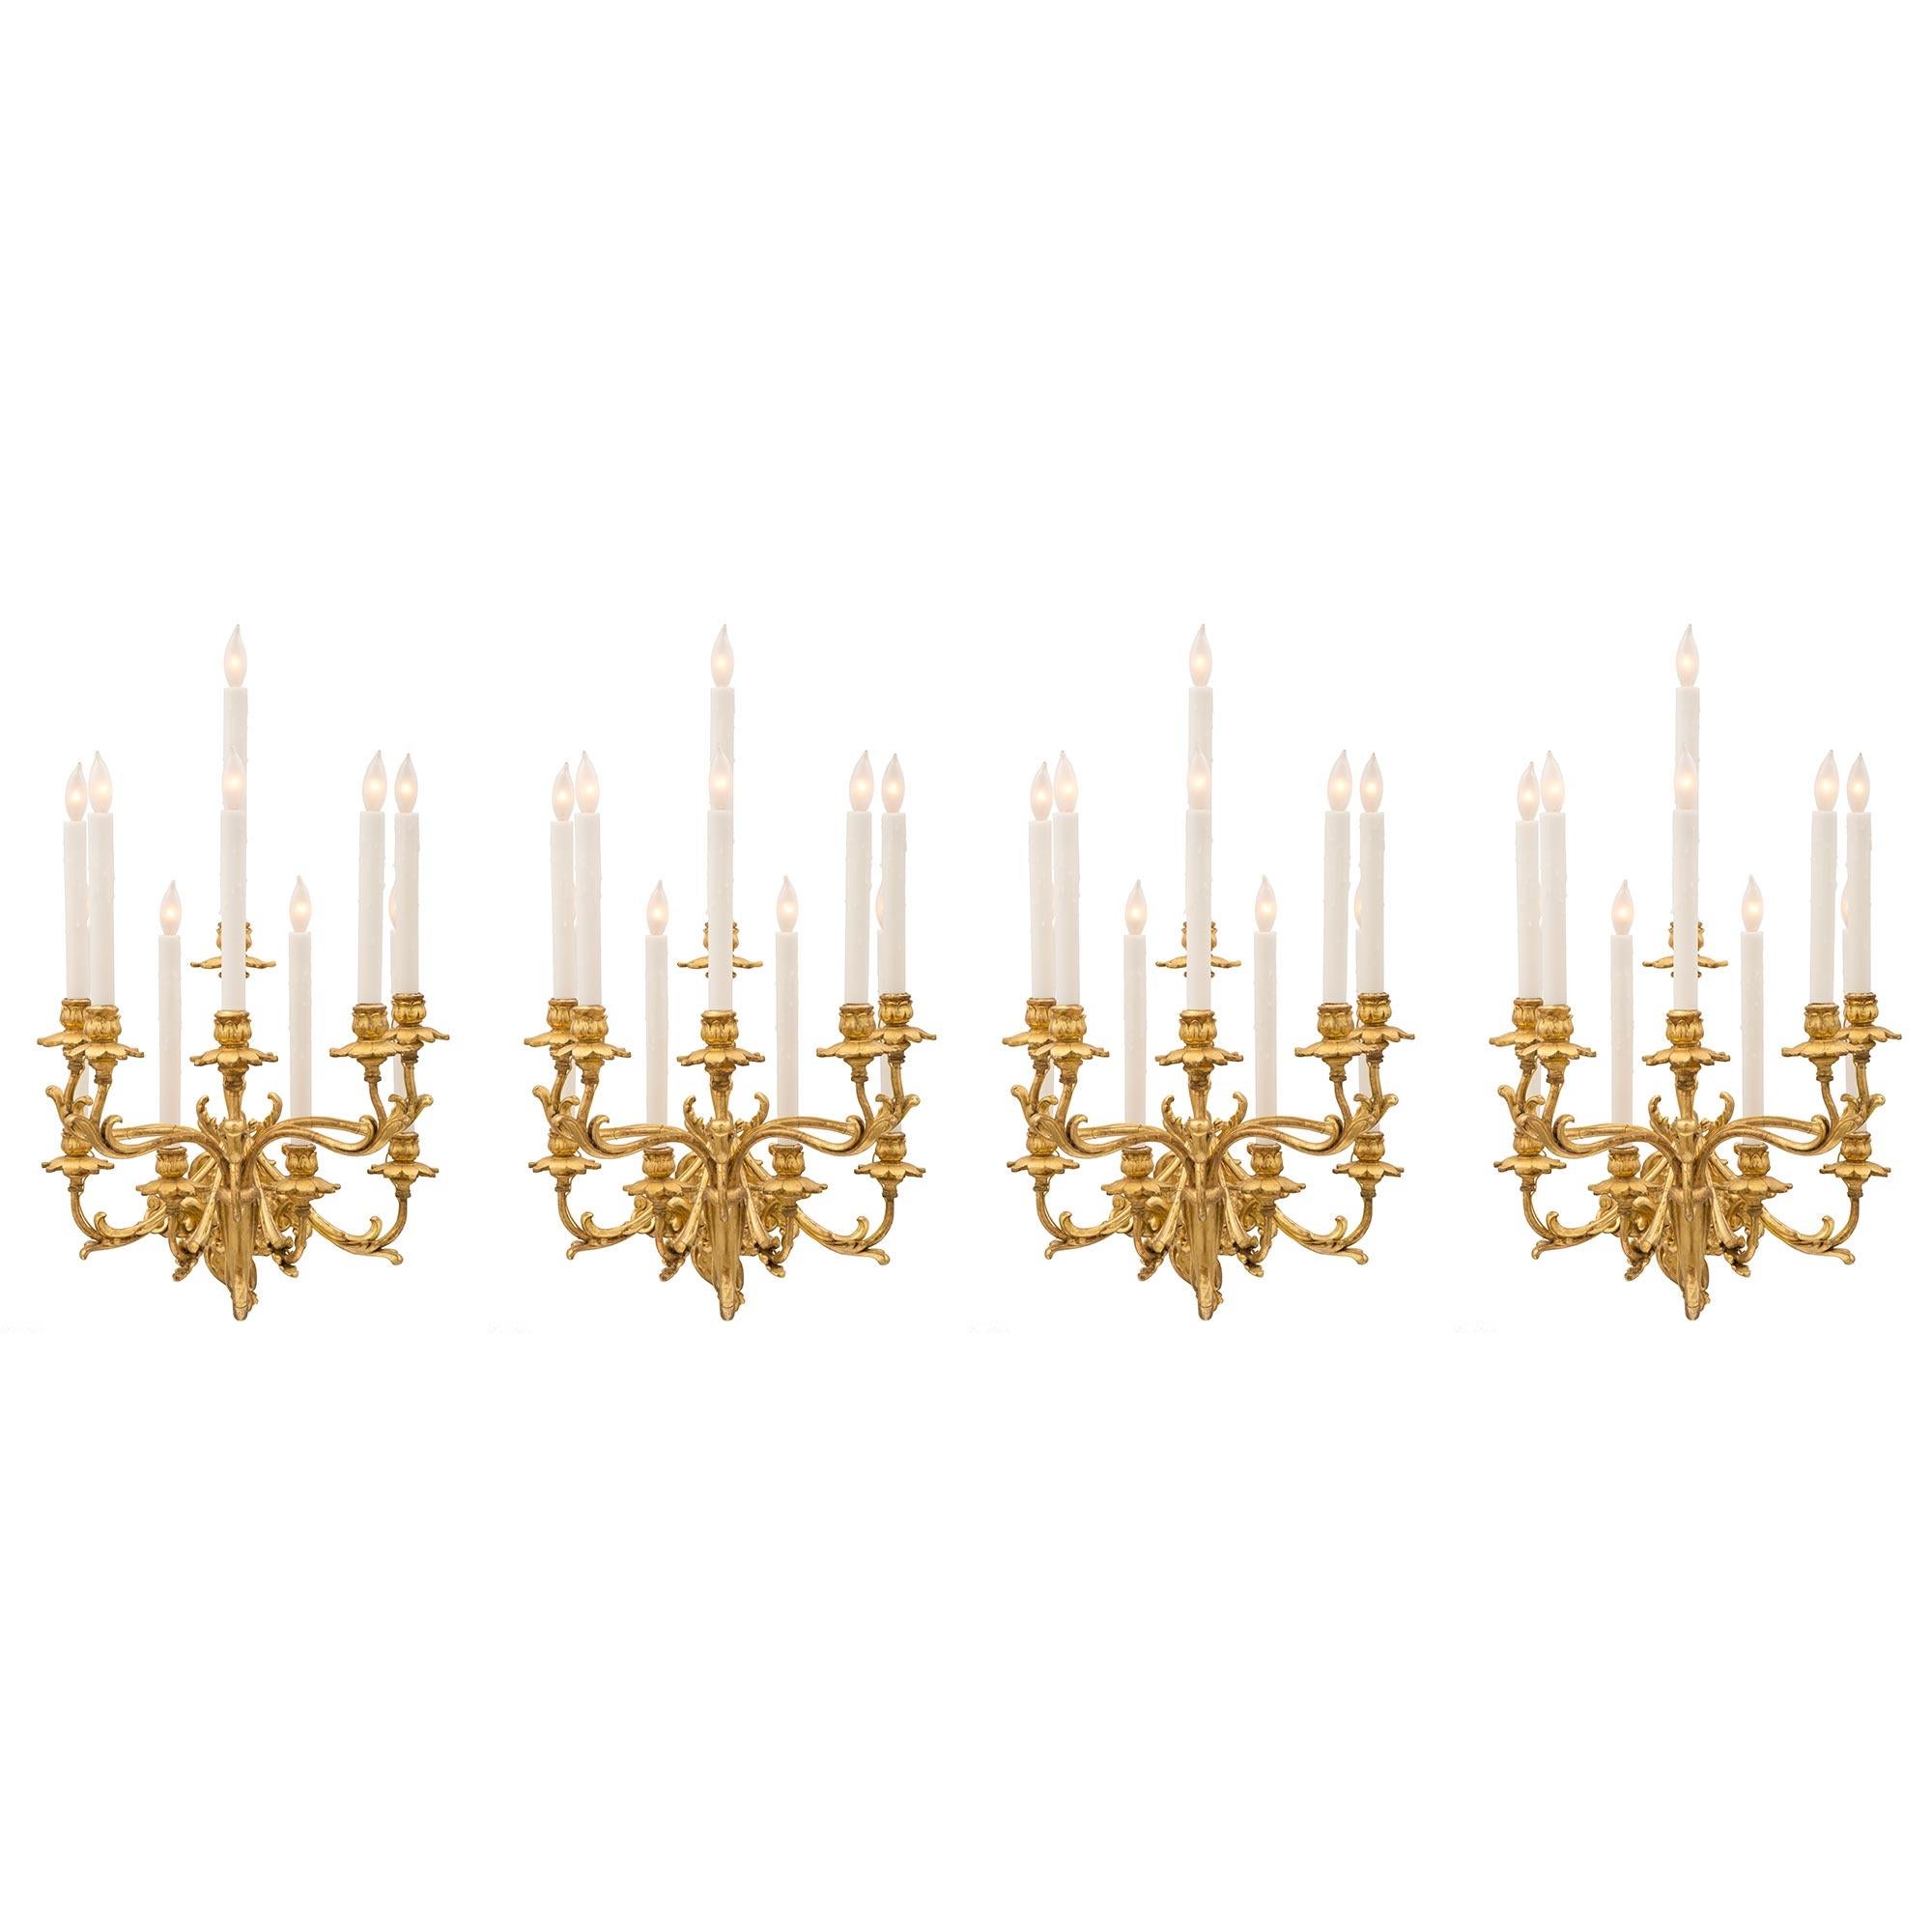 A most impressive and monumentally scaled set of four Italian early 19th century Rococo st. giltwood and gilt metal sconces. Each ten arm sconce is centered by a beautiful scrolled foliate back plate from where the single scrolled arm branches out.